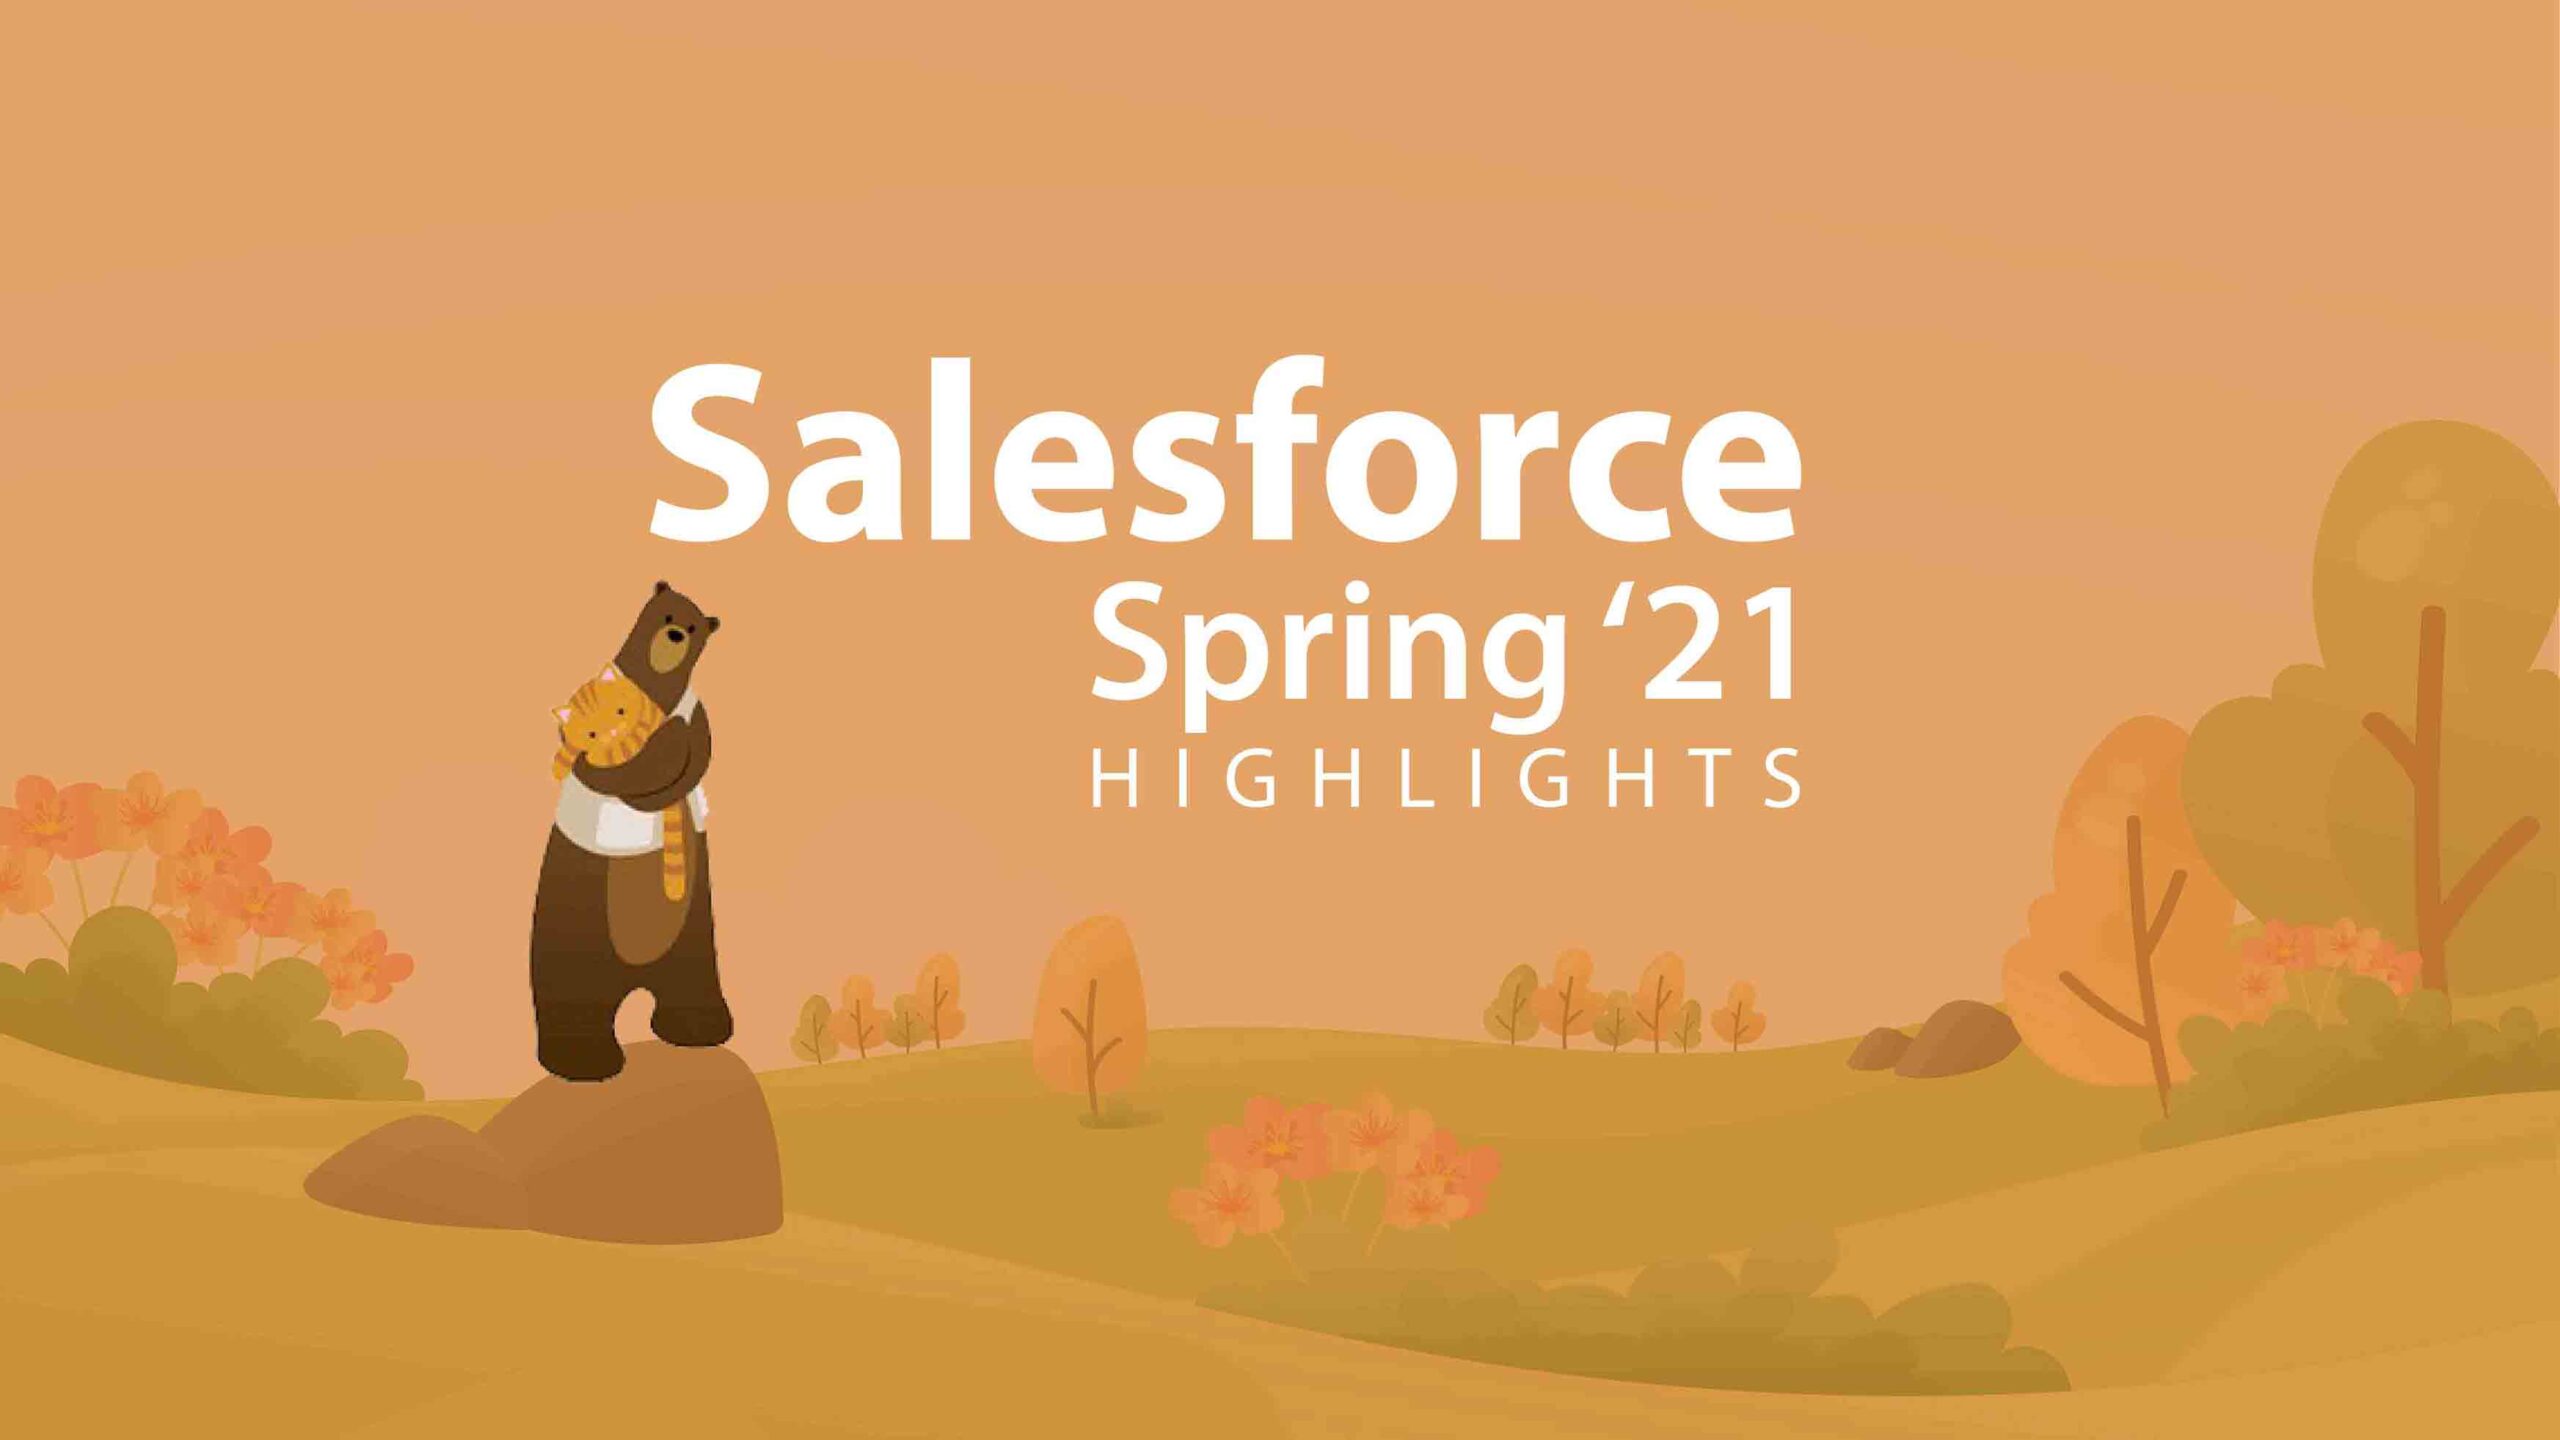 Salesforce Spring '21 Highlights - Kcloud Technolo